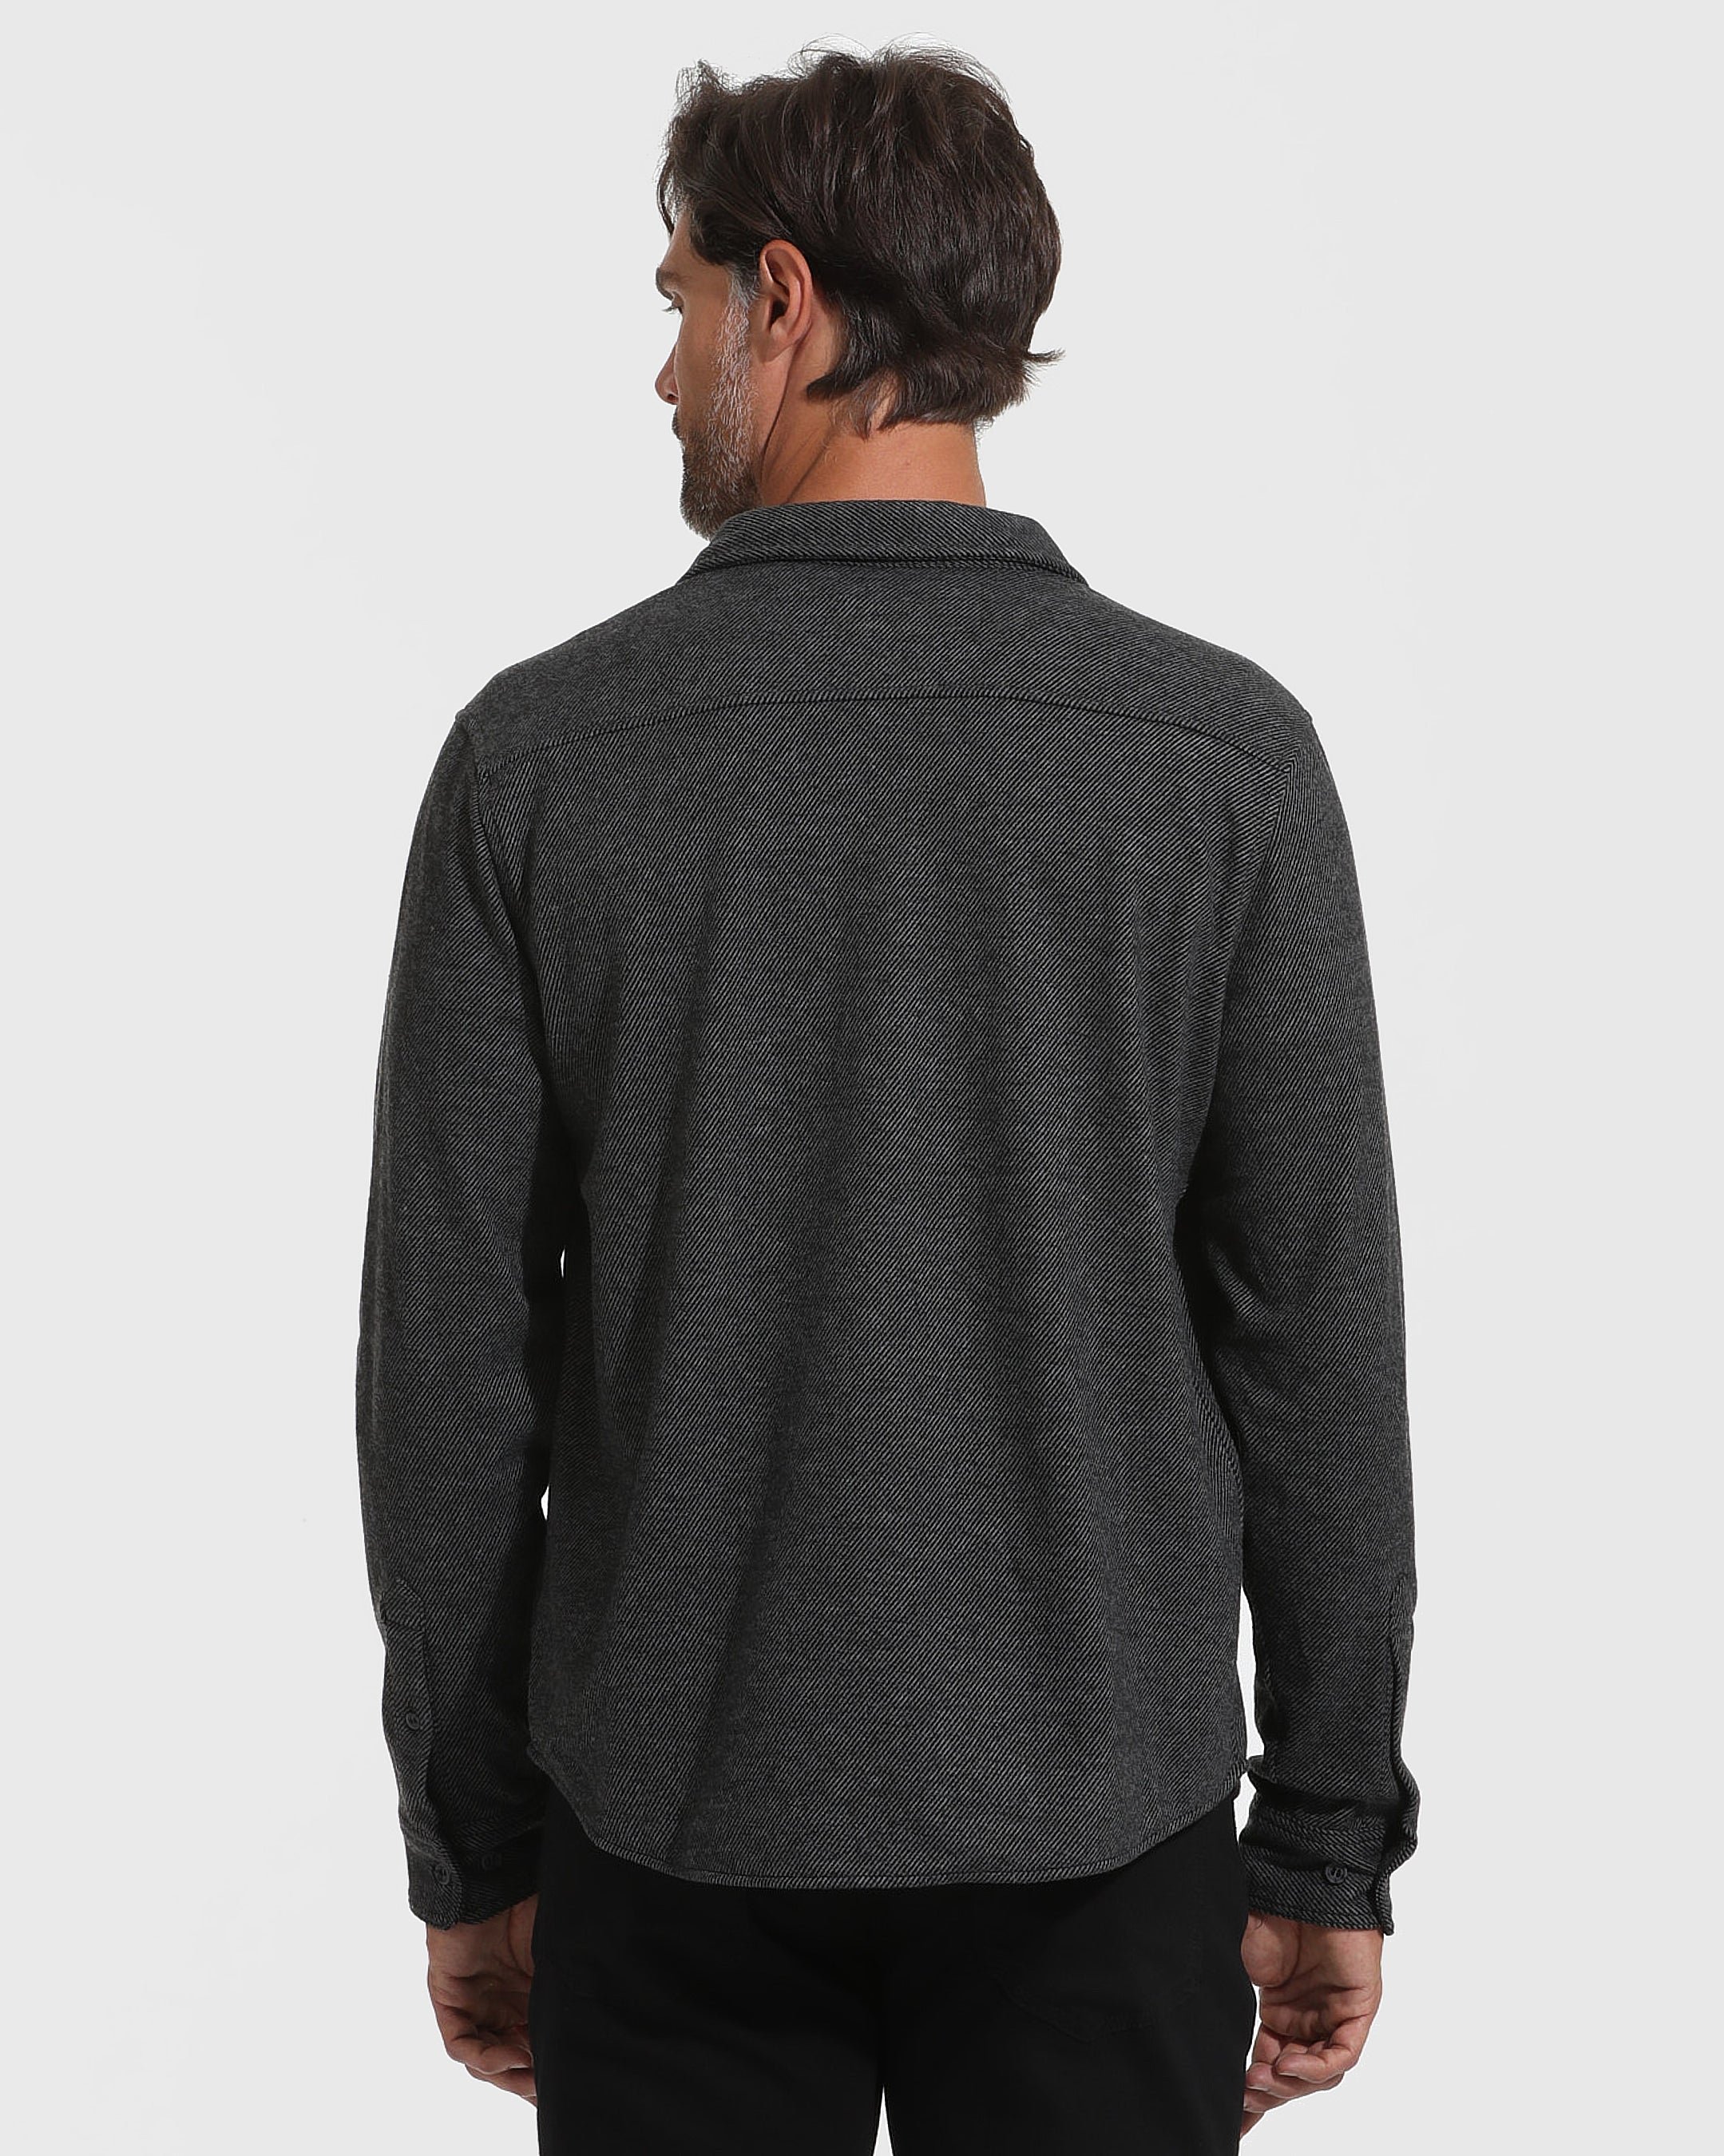 Black and Carbon Sweater Button Up Shirt